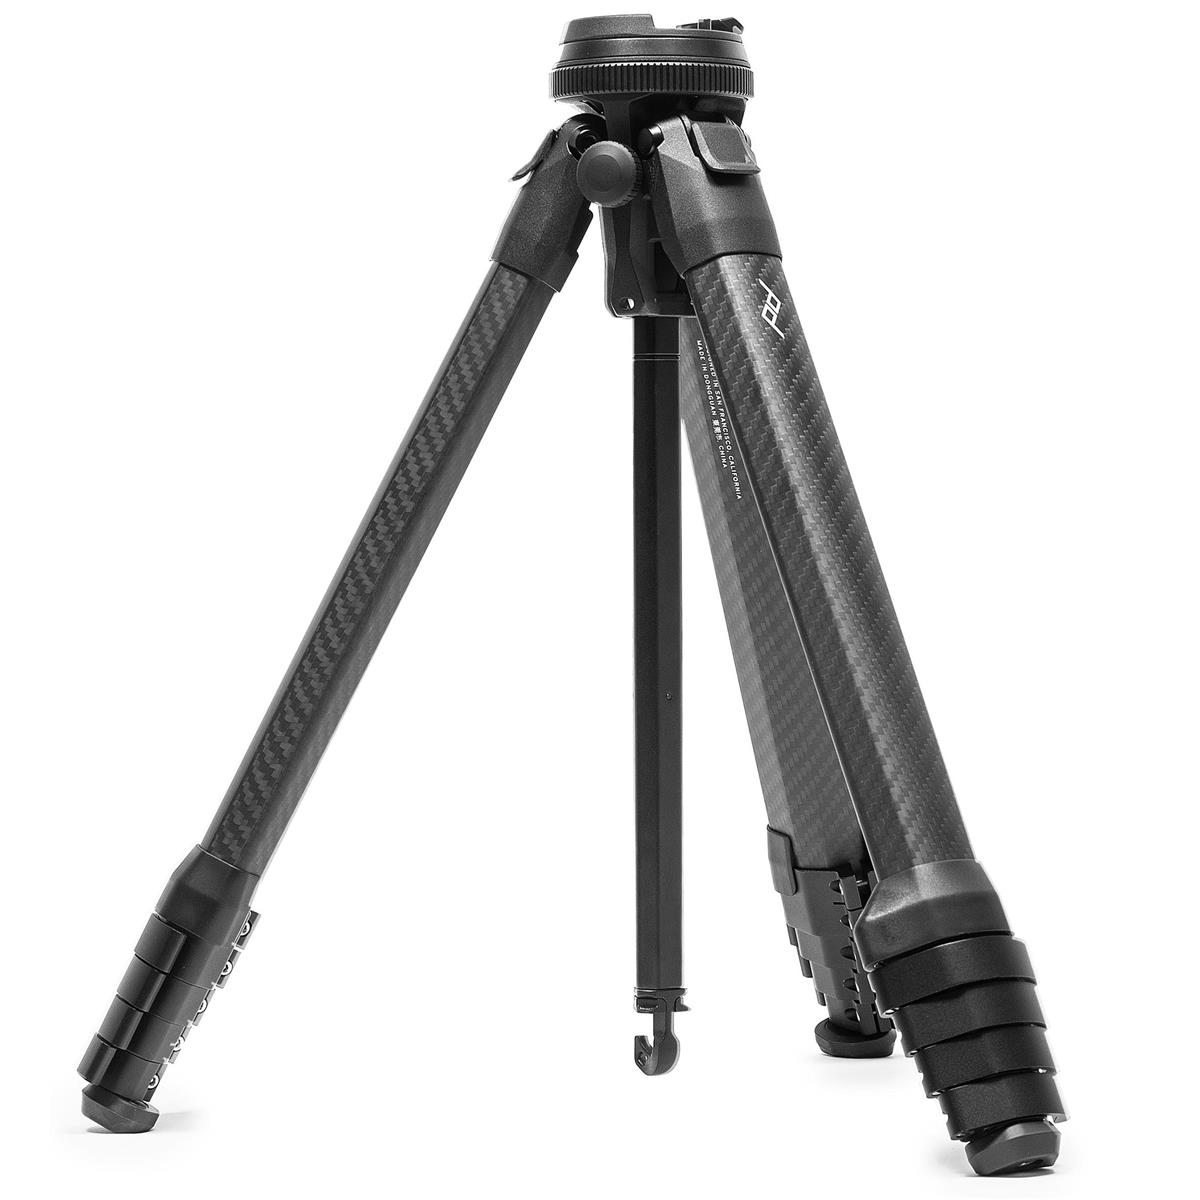 Image of Peak Design 5-Section Carbon Fiber Travel Tripod with Ball Head